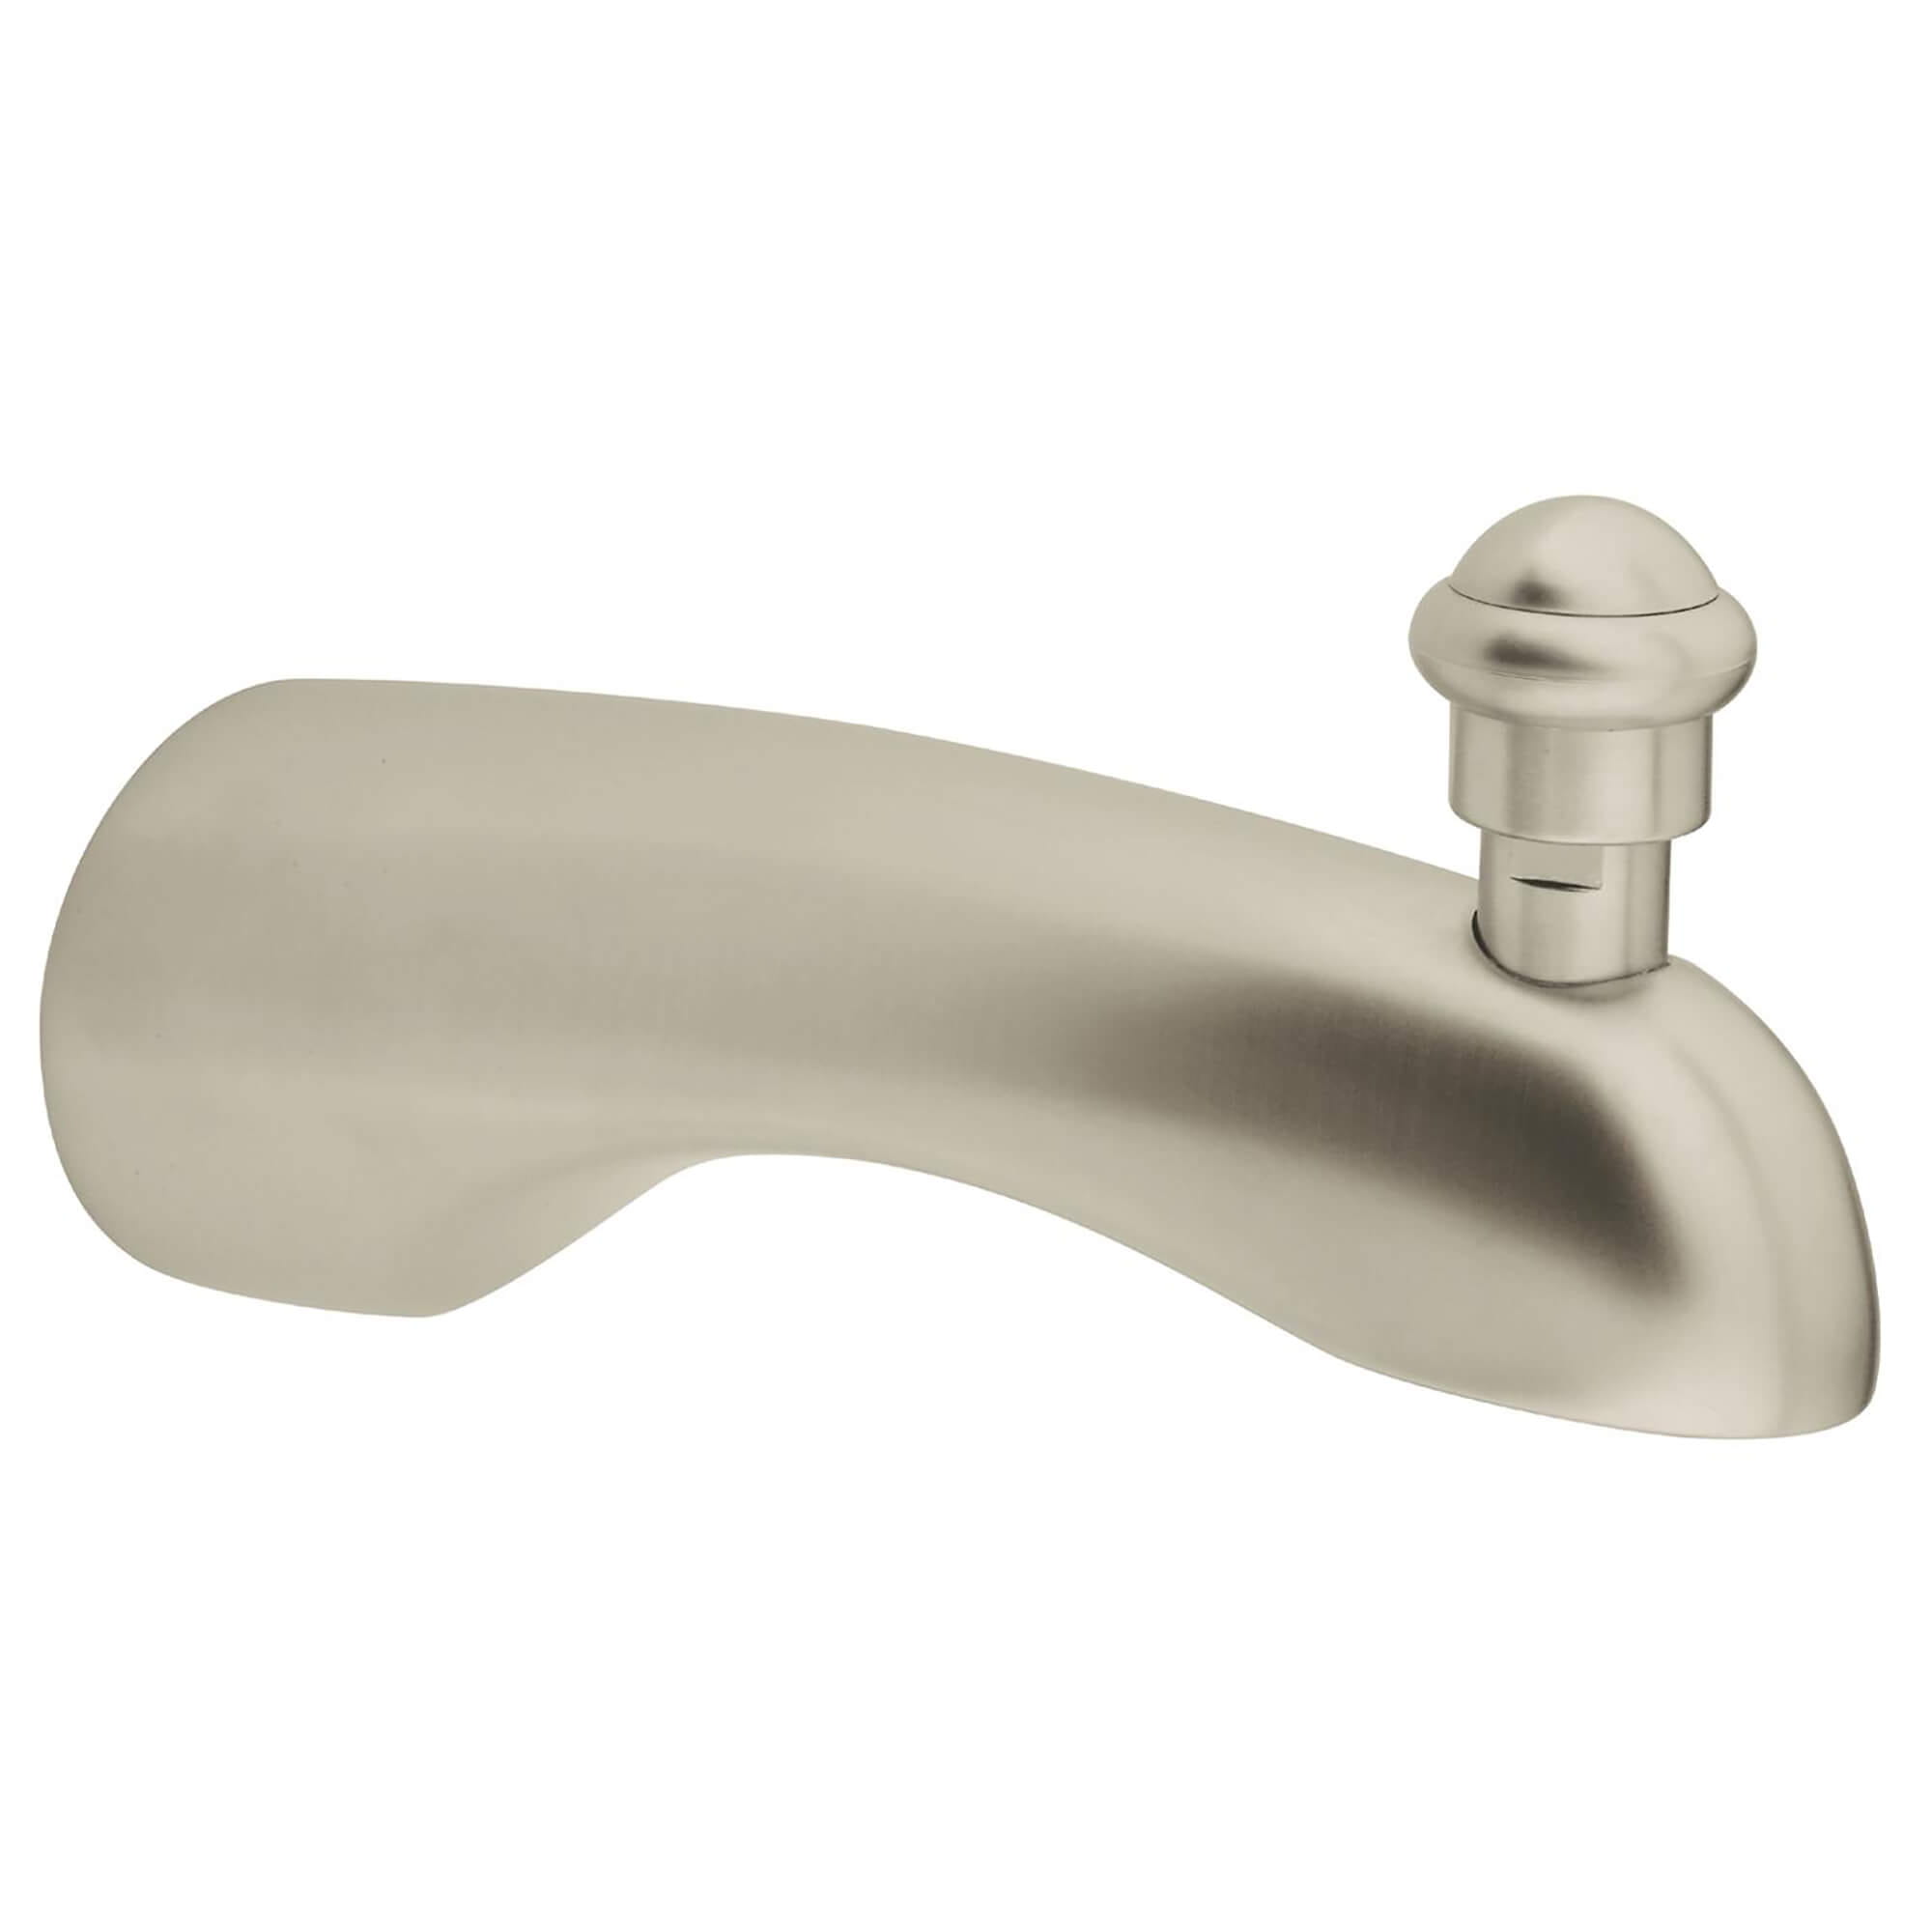 Outlet 6 Inch GROHE BRUSHED NICKEL